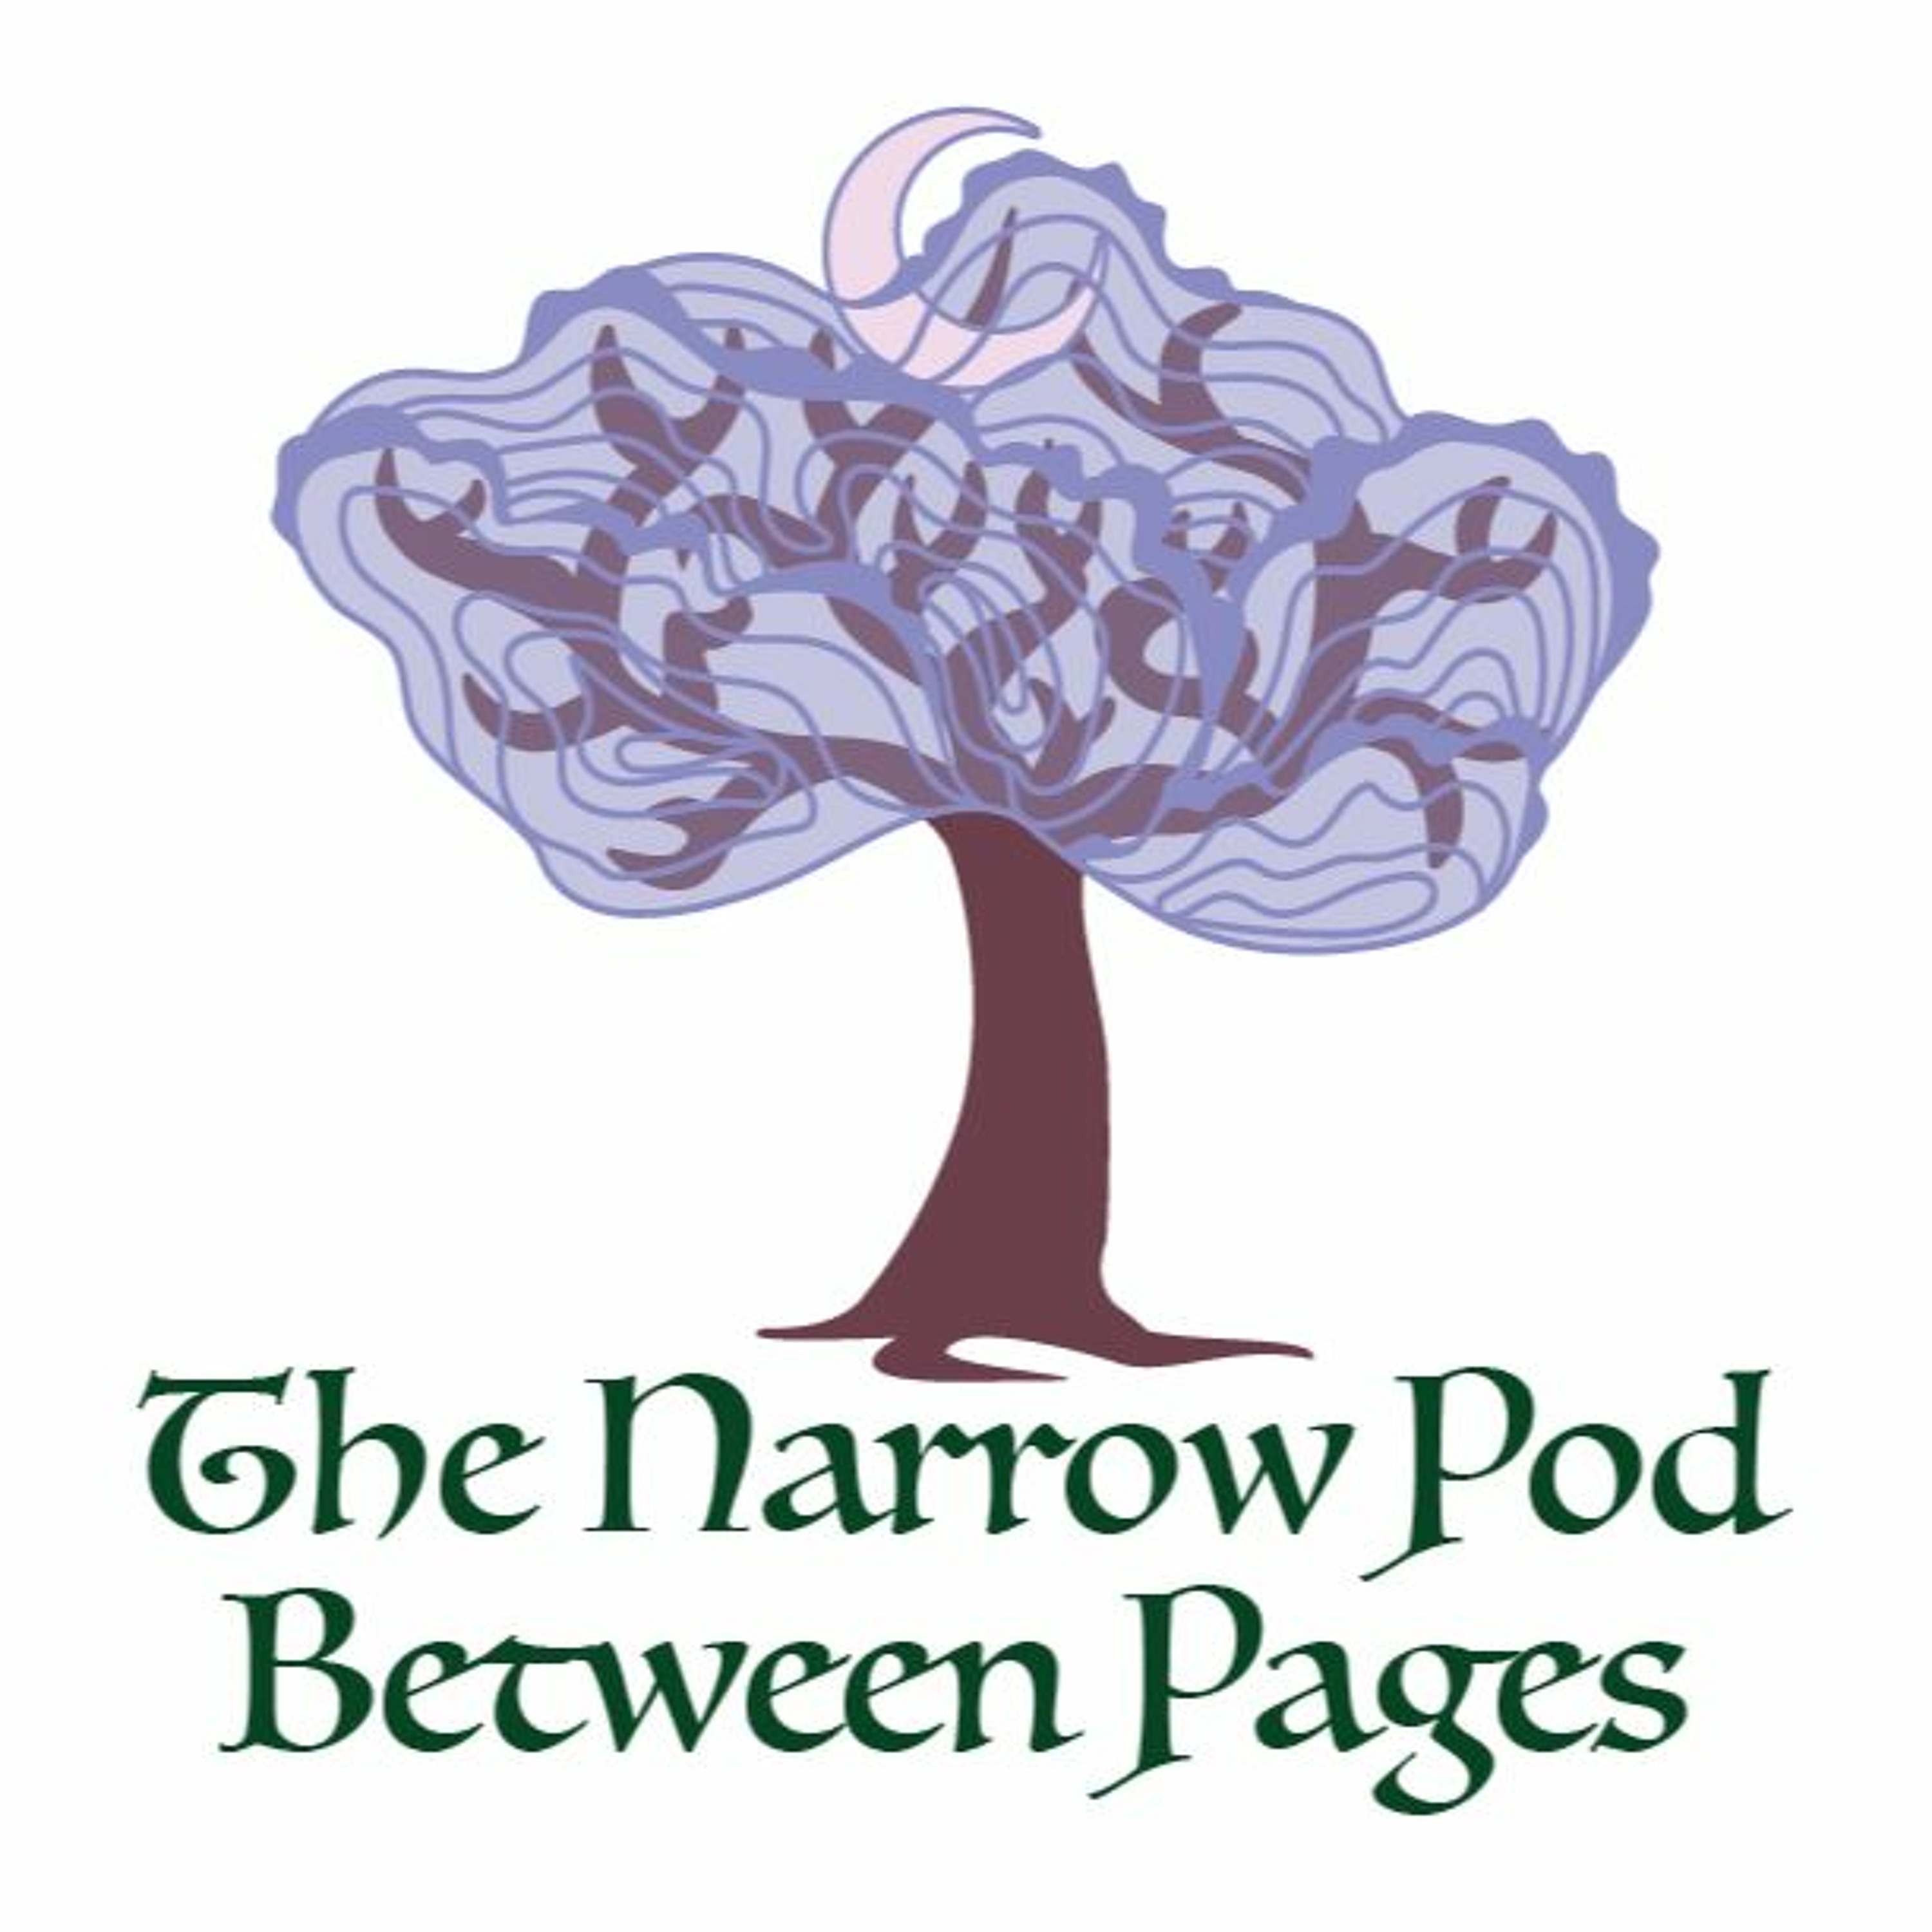 The Narrow Pod Between Pages - Page 185: I'm a reasonable man, get off my case